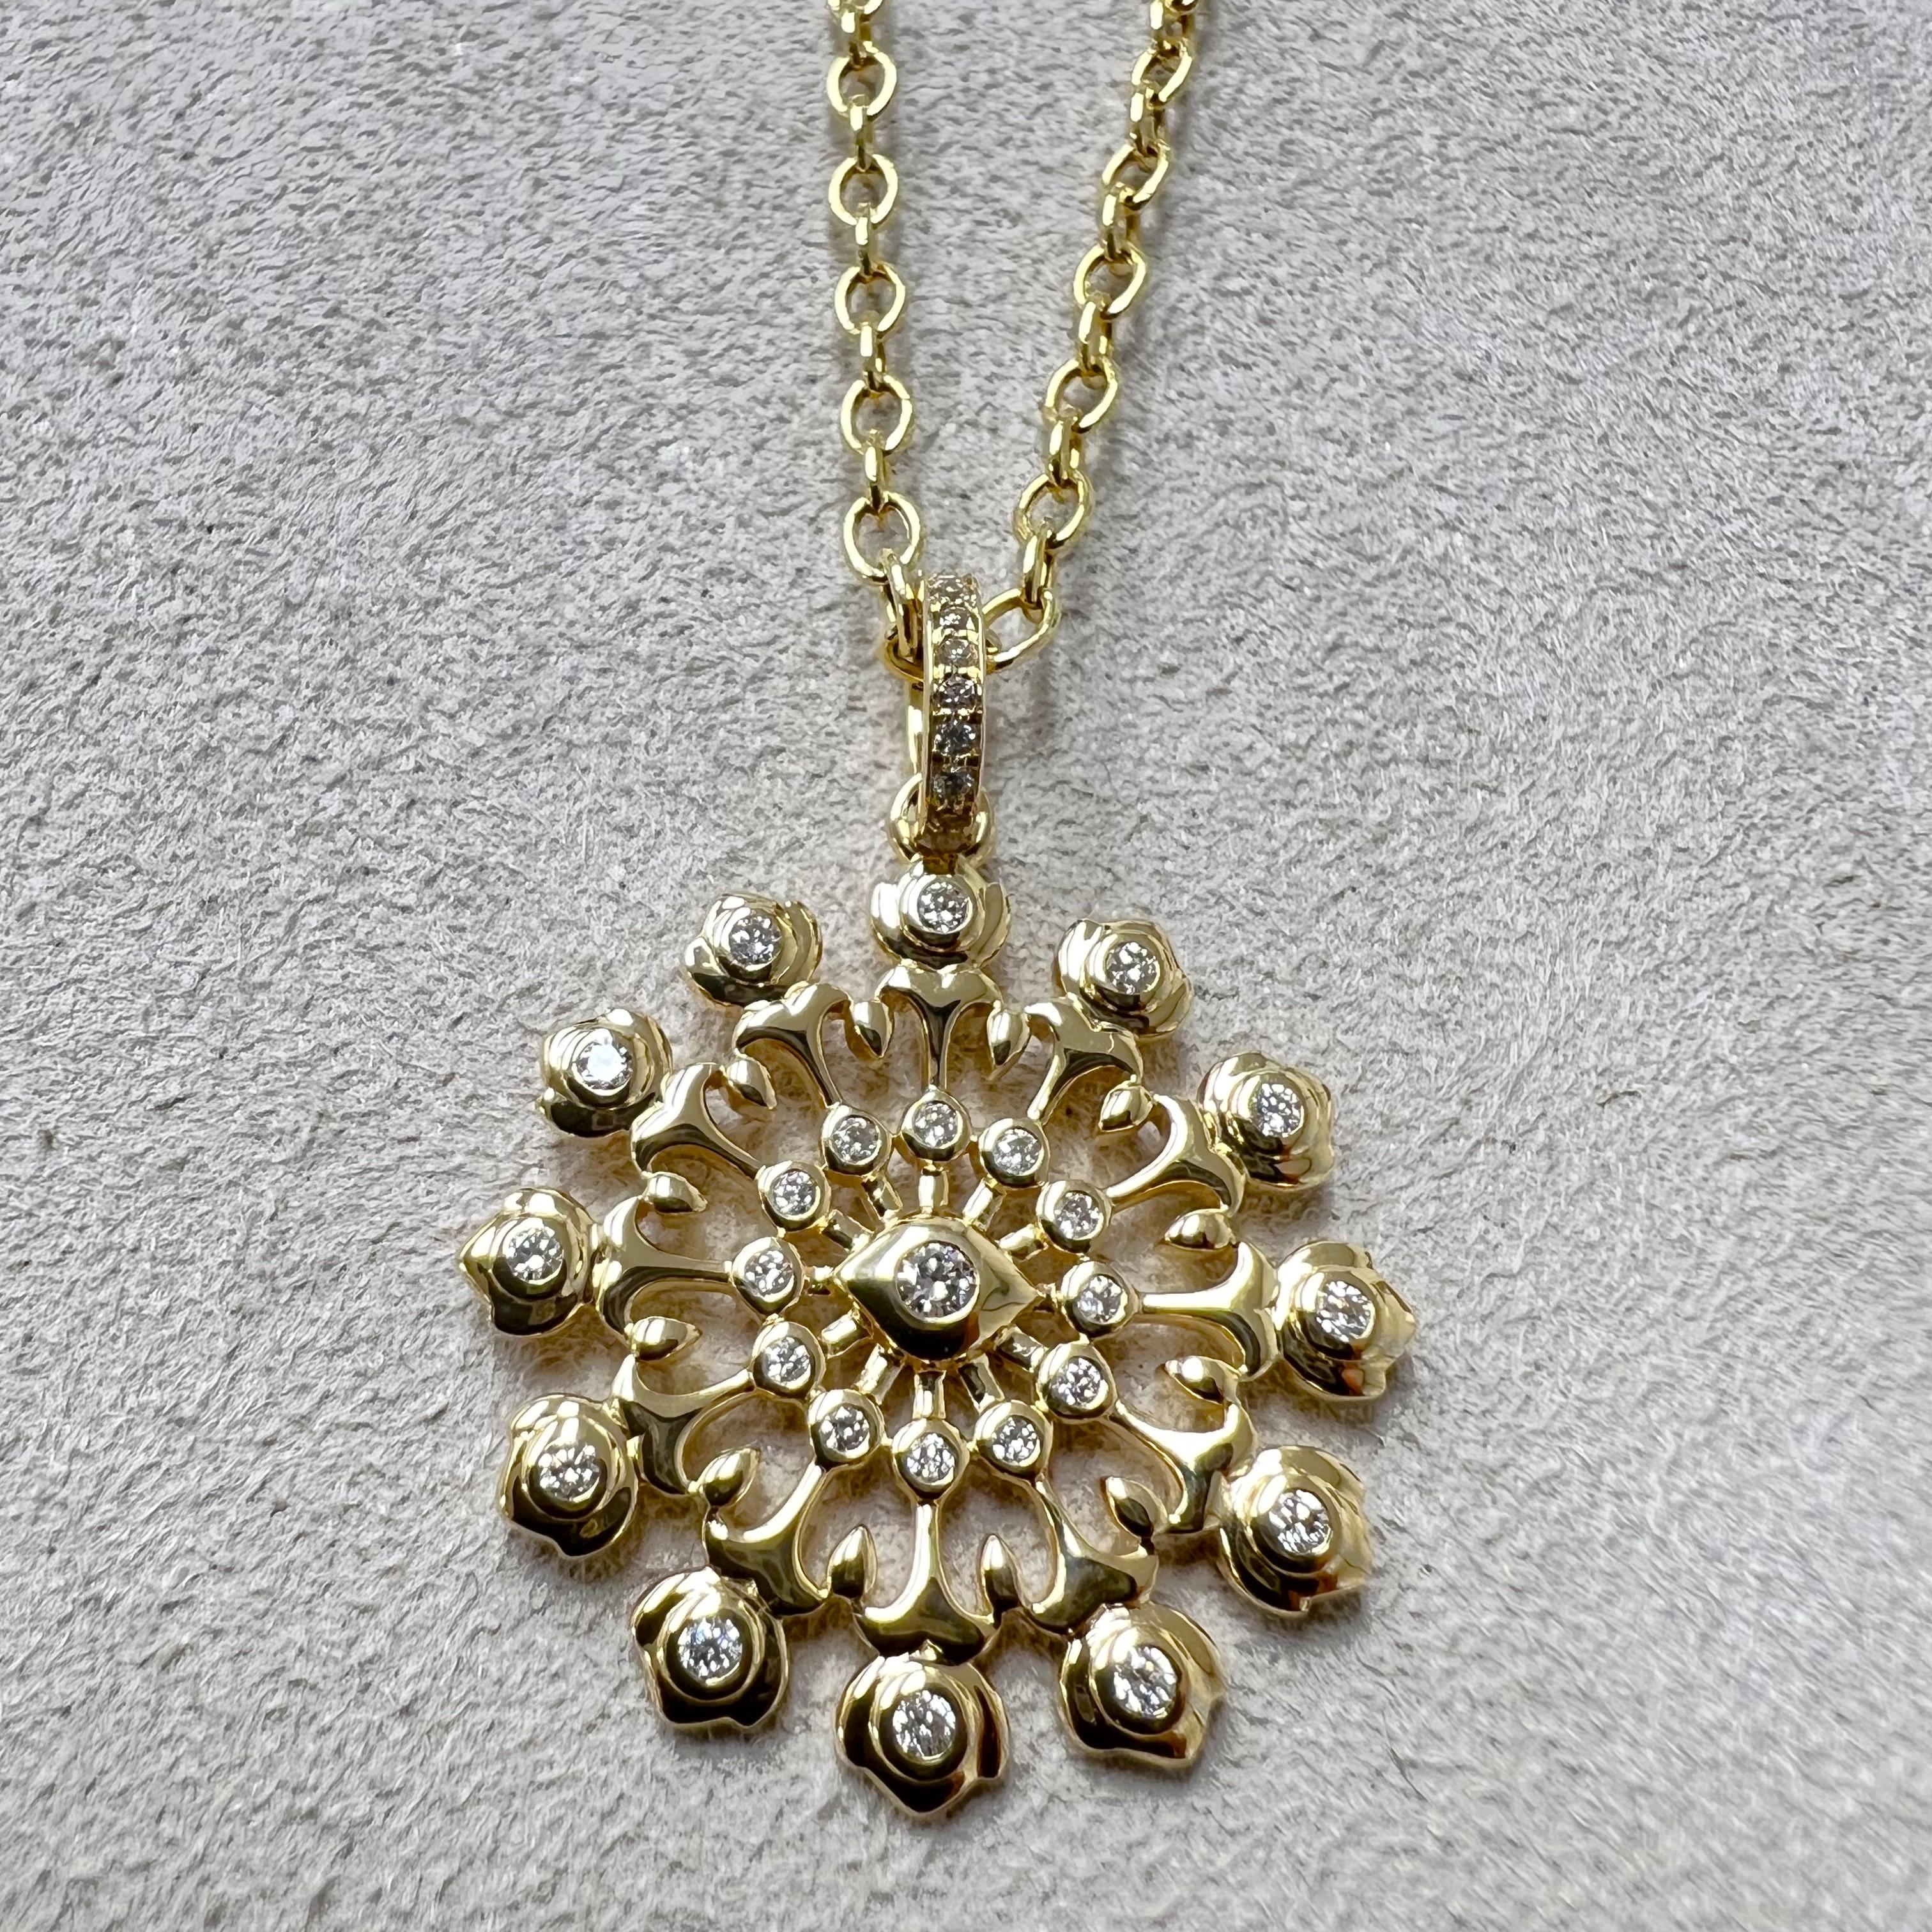 Created in 18 karat yellow gold
Diamonds 0.40 carat approx.
Chain sold separately


 About the Designers ~ Dharmesh & Namrata

Drawing inspiration from little things, Dharmesh & Namrata Kothari have created an extraordinary and refreshing collection